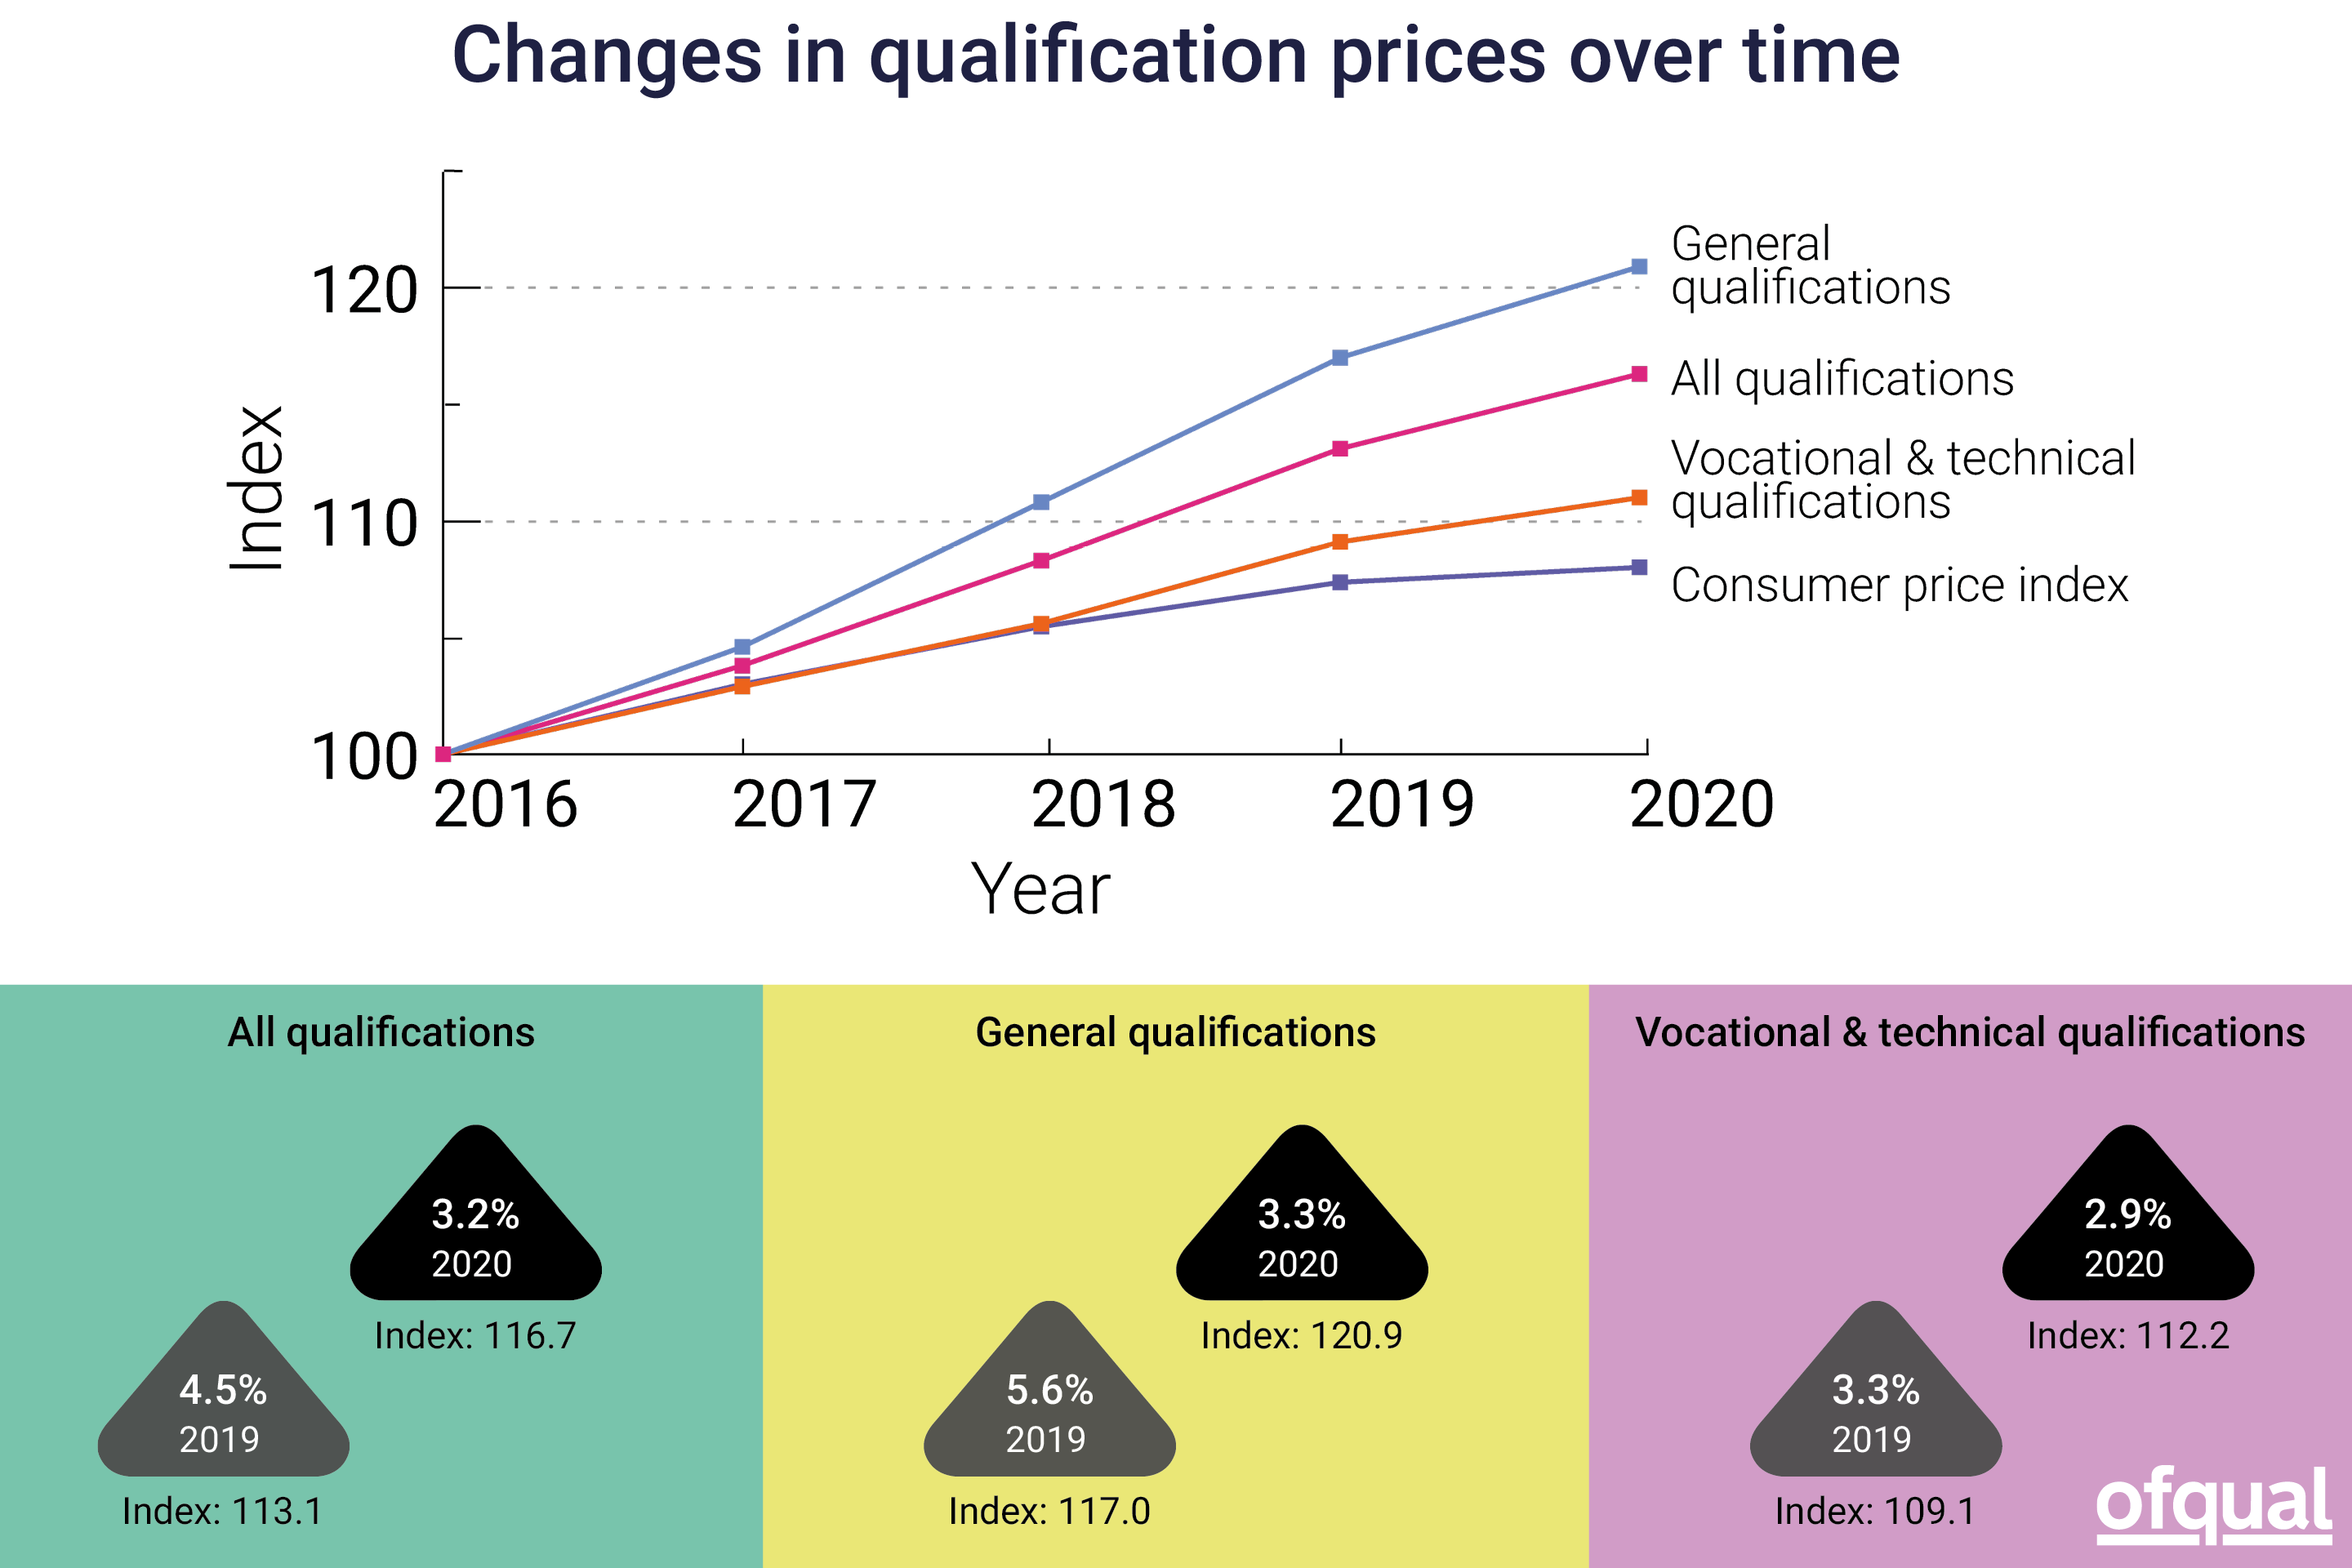 Qualification prices have risen between 2019 and 2020, but at a slower rate than the previous year.